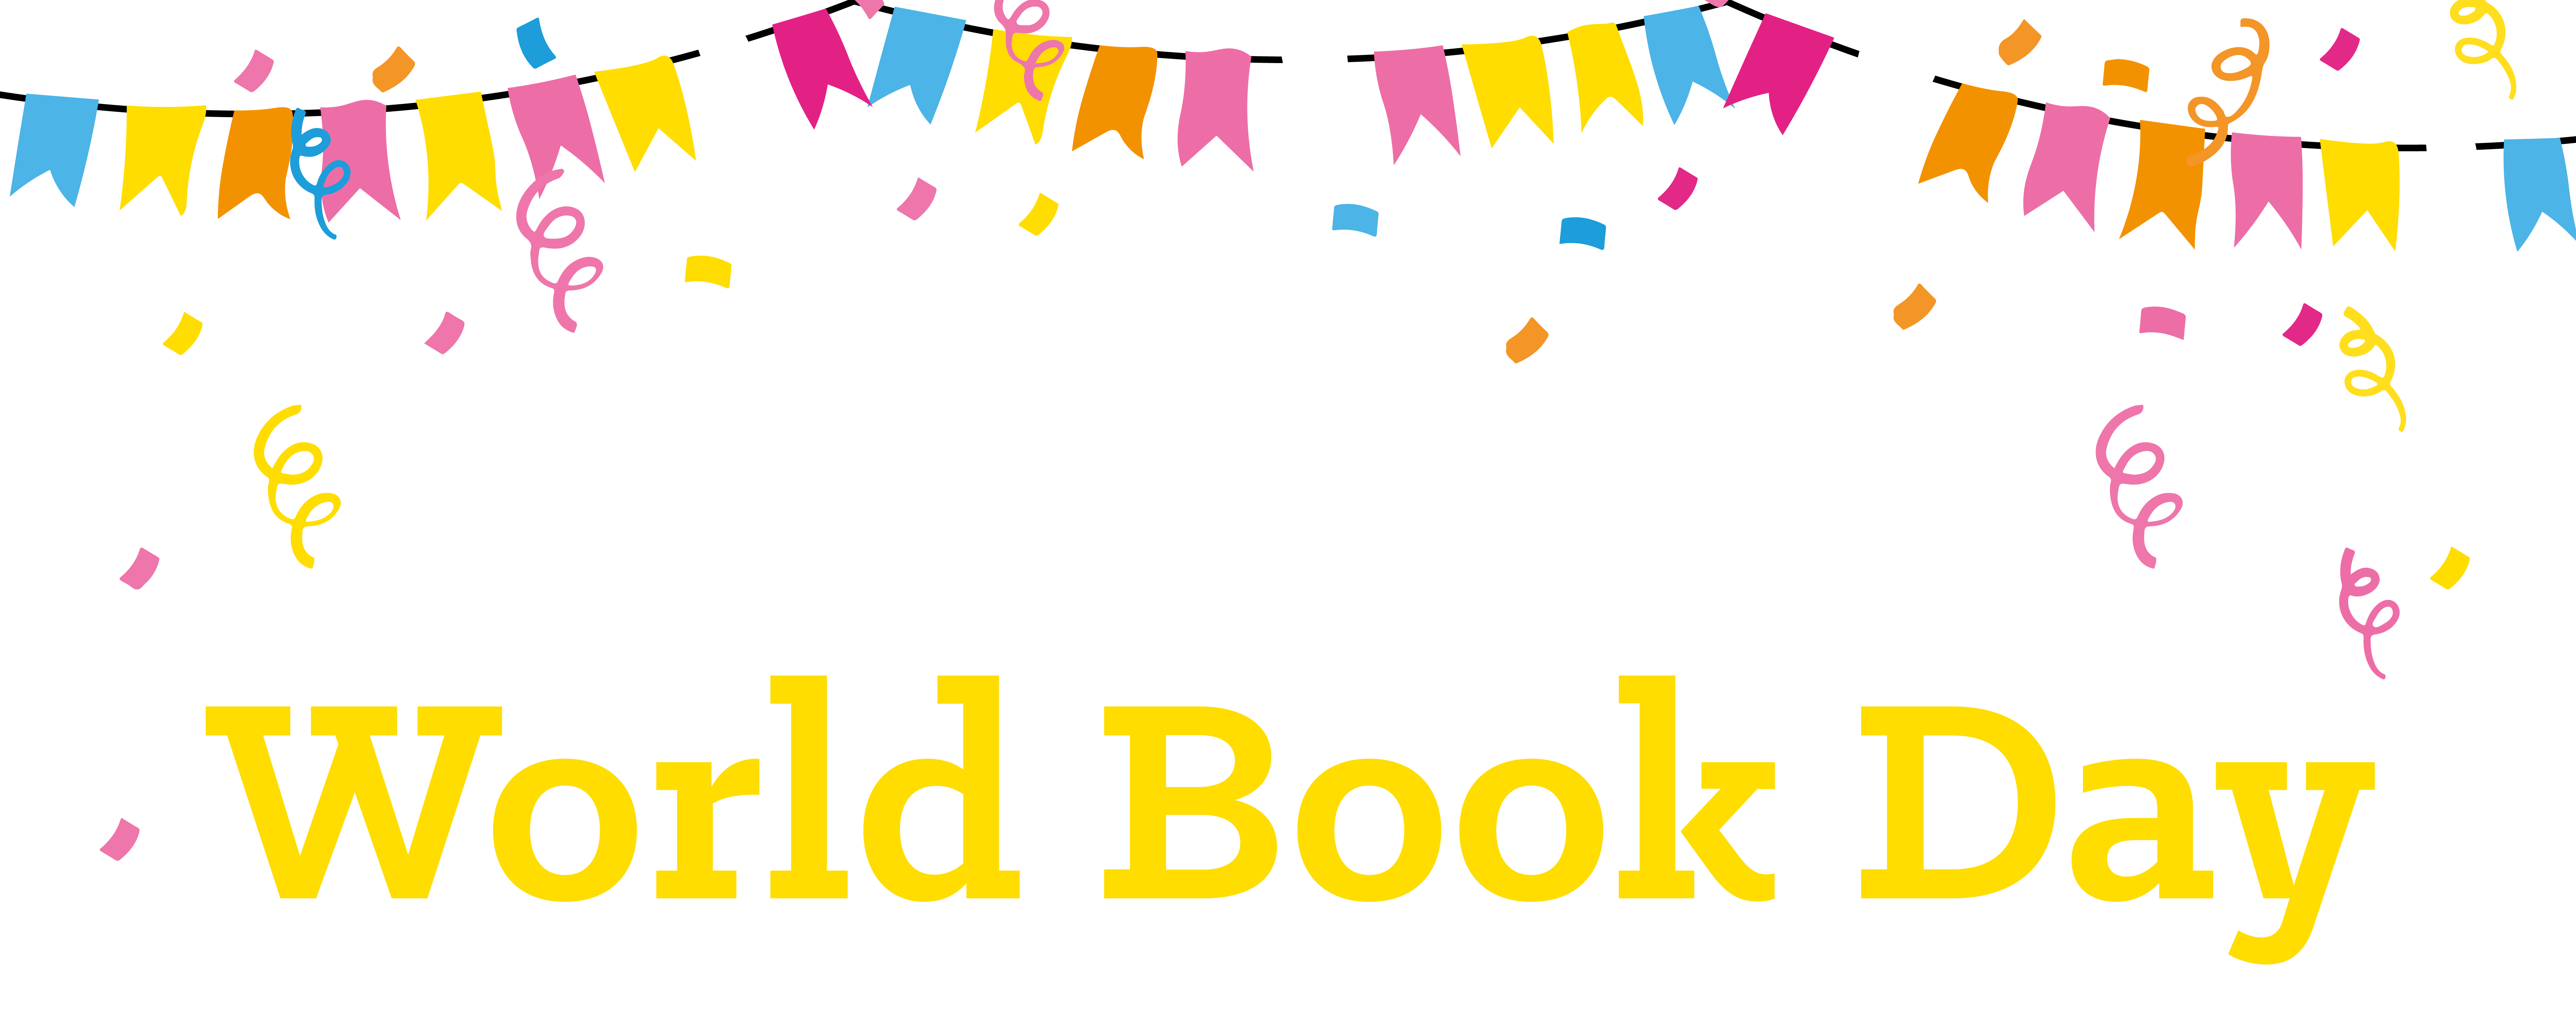 Resources to celebrate World Book Day